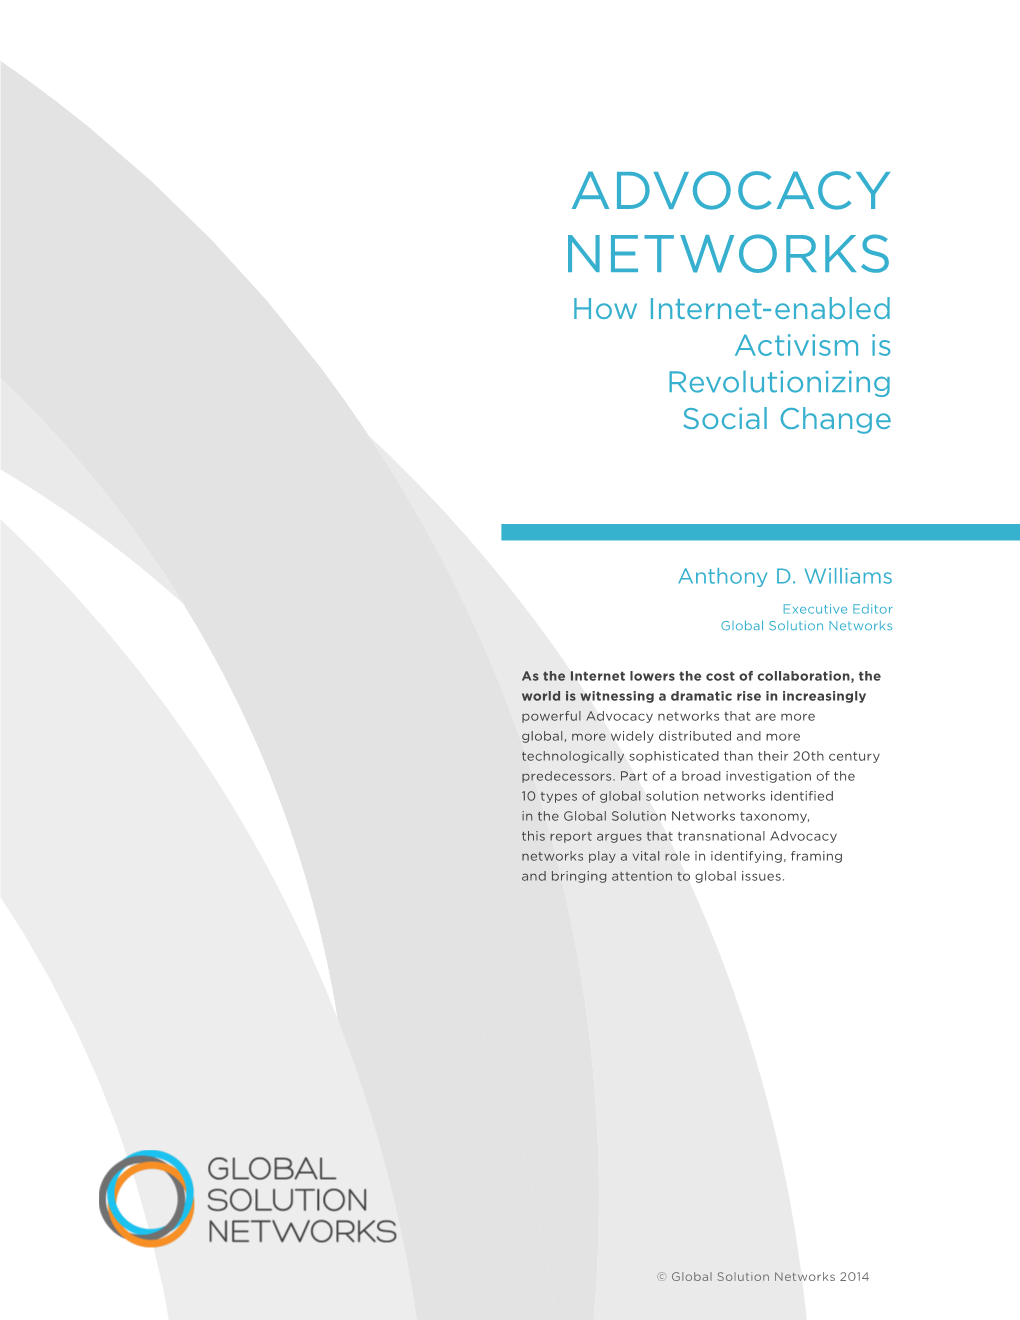 Advocacy Networks How Internet-Enabled Activism Is Revolutionizing Social Change